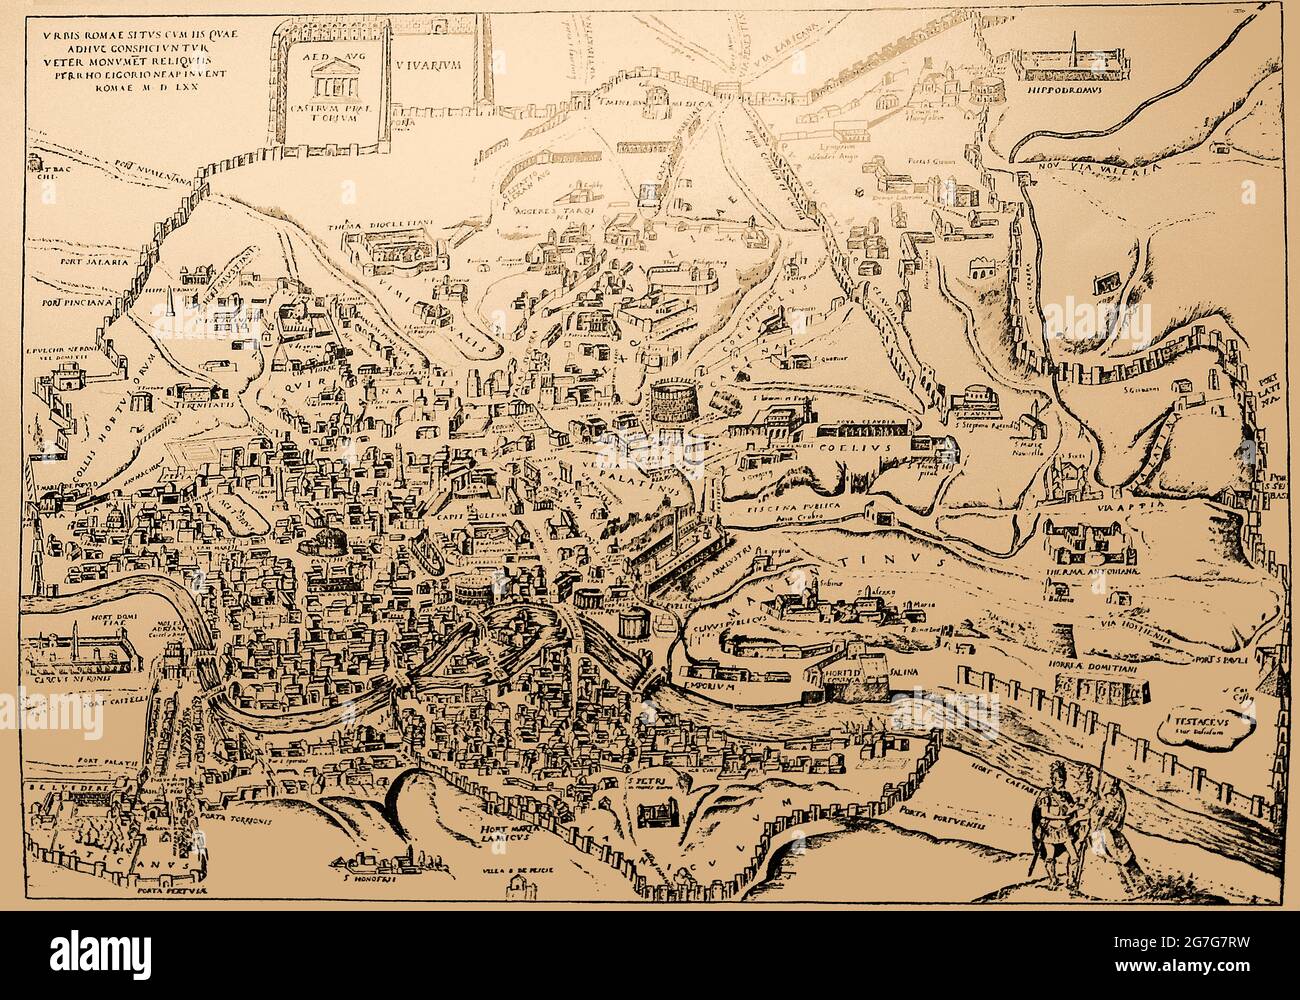 A 16th century map of the city of Rome, Italy, showing the major landmarks , buildings and names in Latin, in 1570 Stock Photo